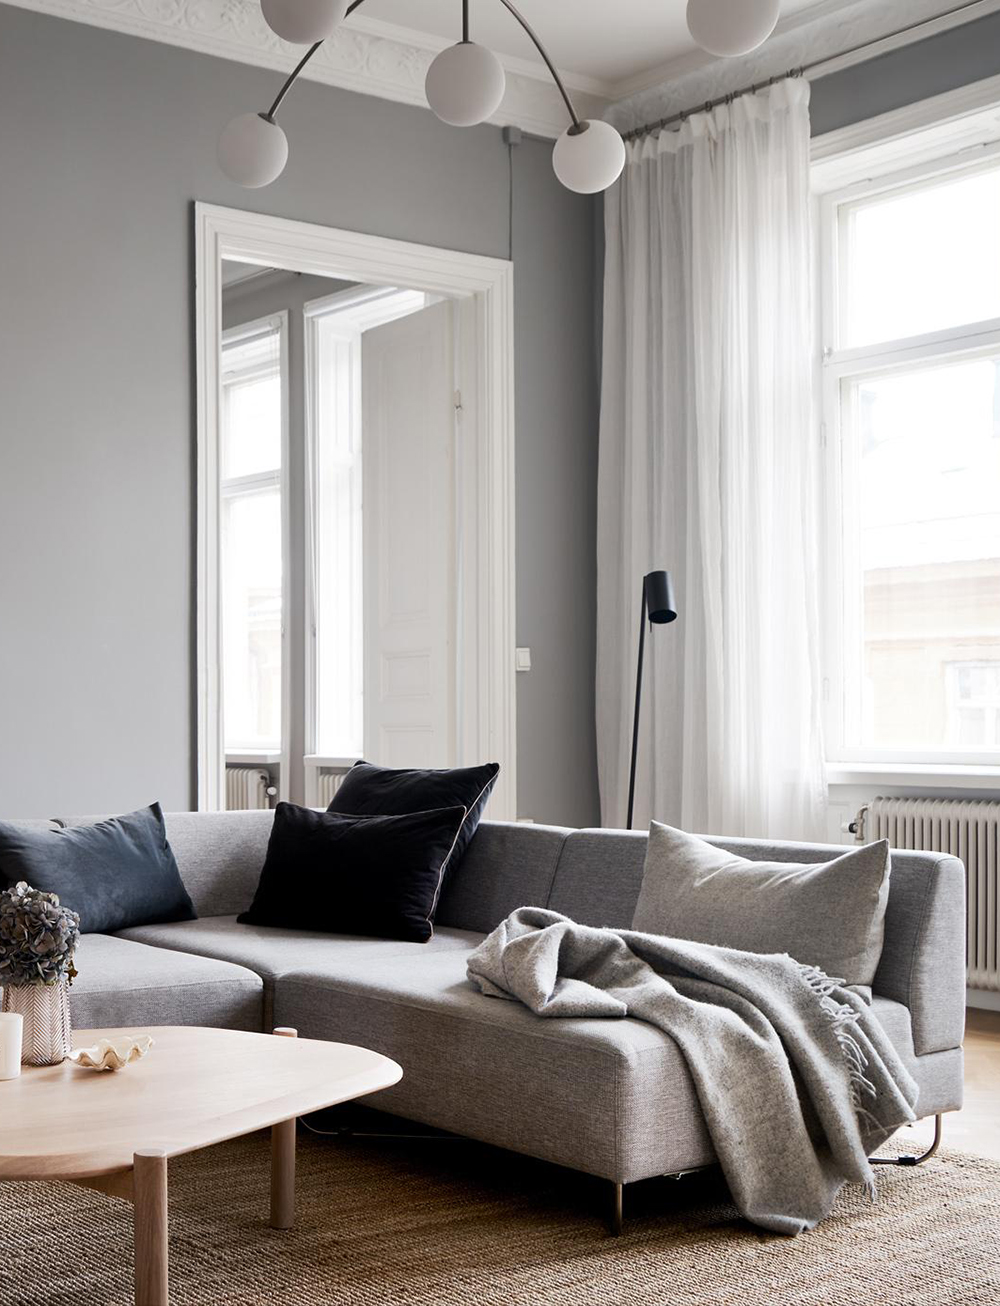 A Period Home with Grey Living Room and a Cosy Corner Sofa